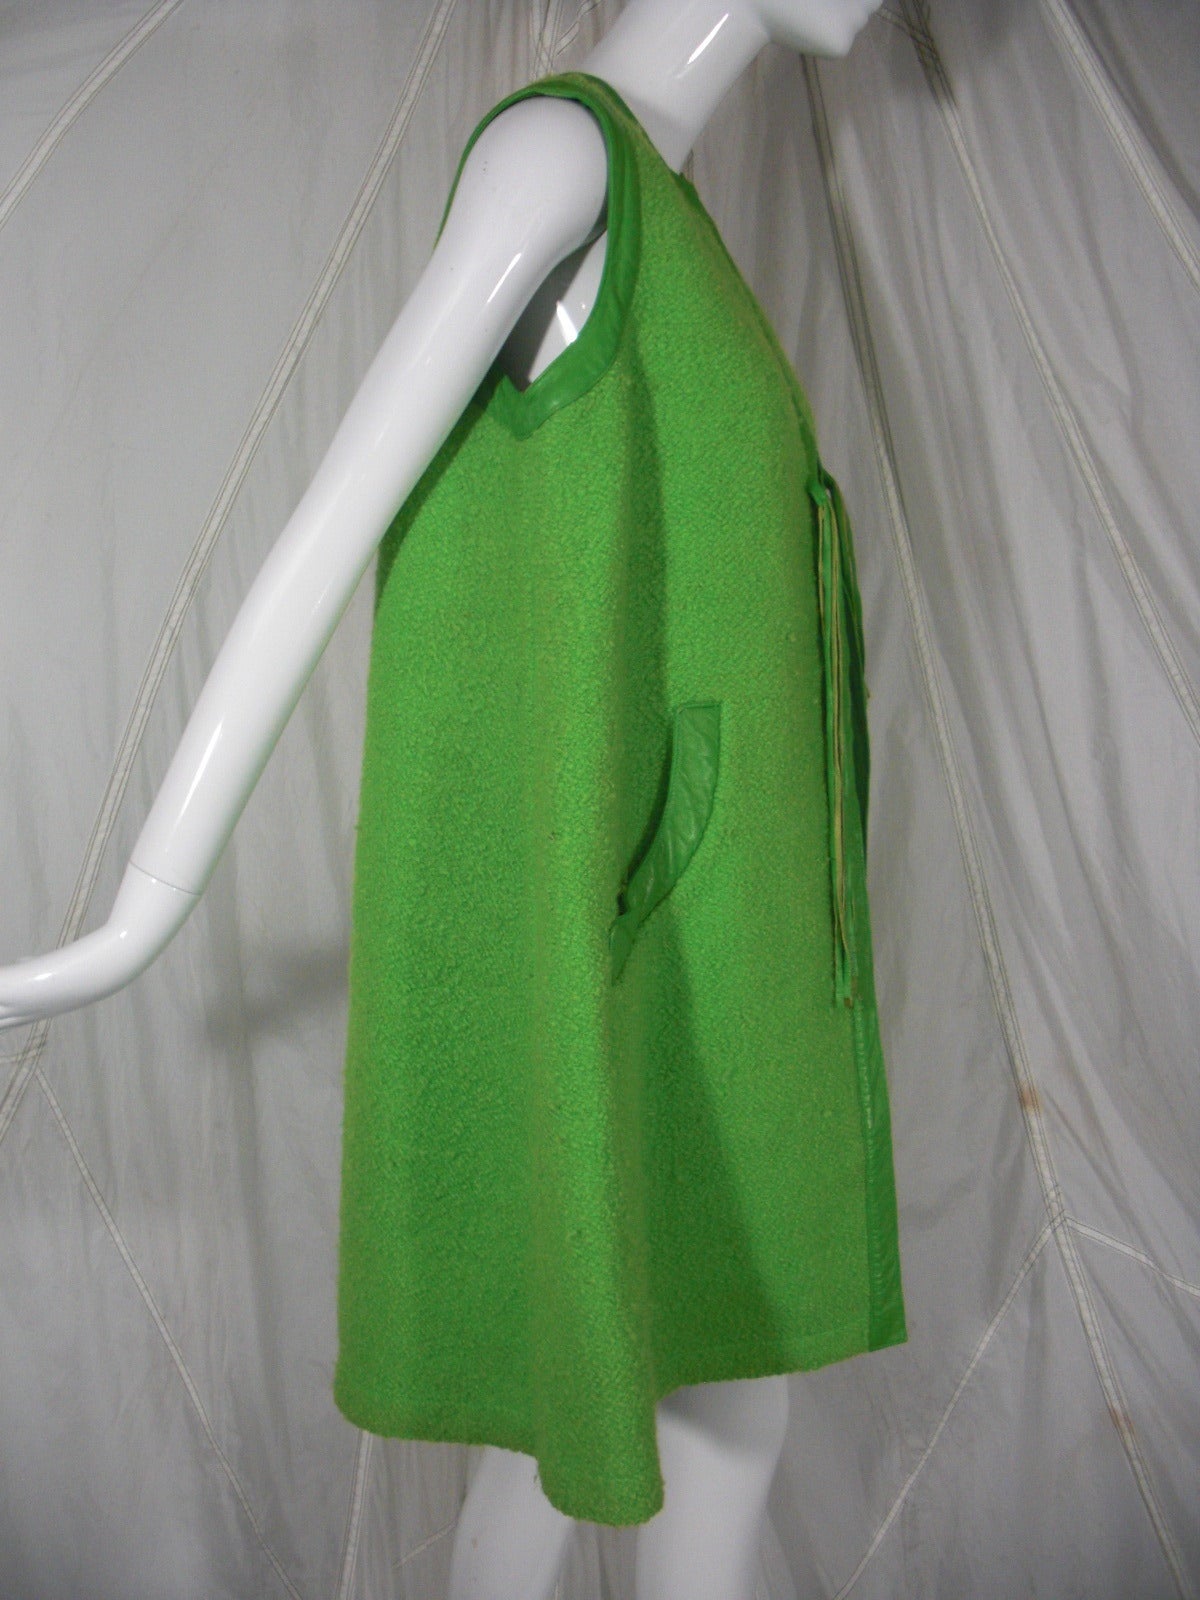 A mod 1960s Bonnie Cashin apple green wool vest with front closure and leather trim at armholes and neckline.  Trimmed side pockets and tie closure.